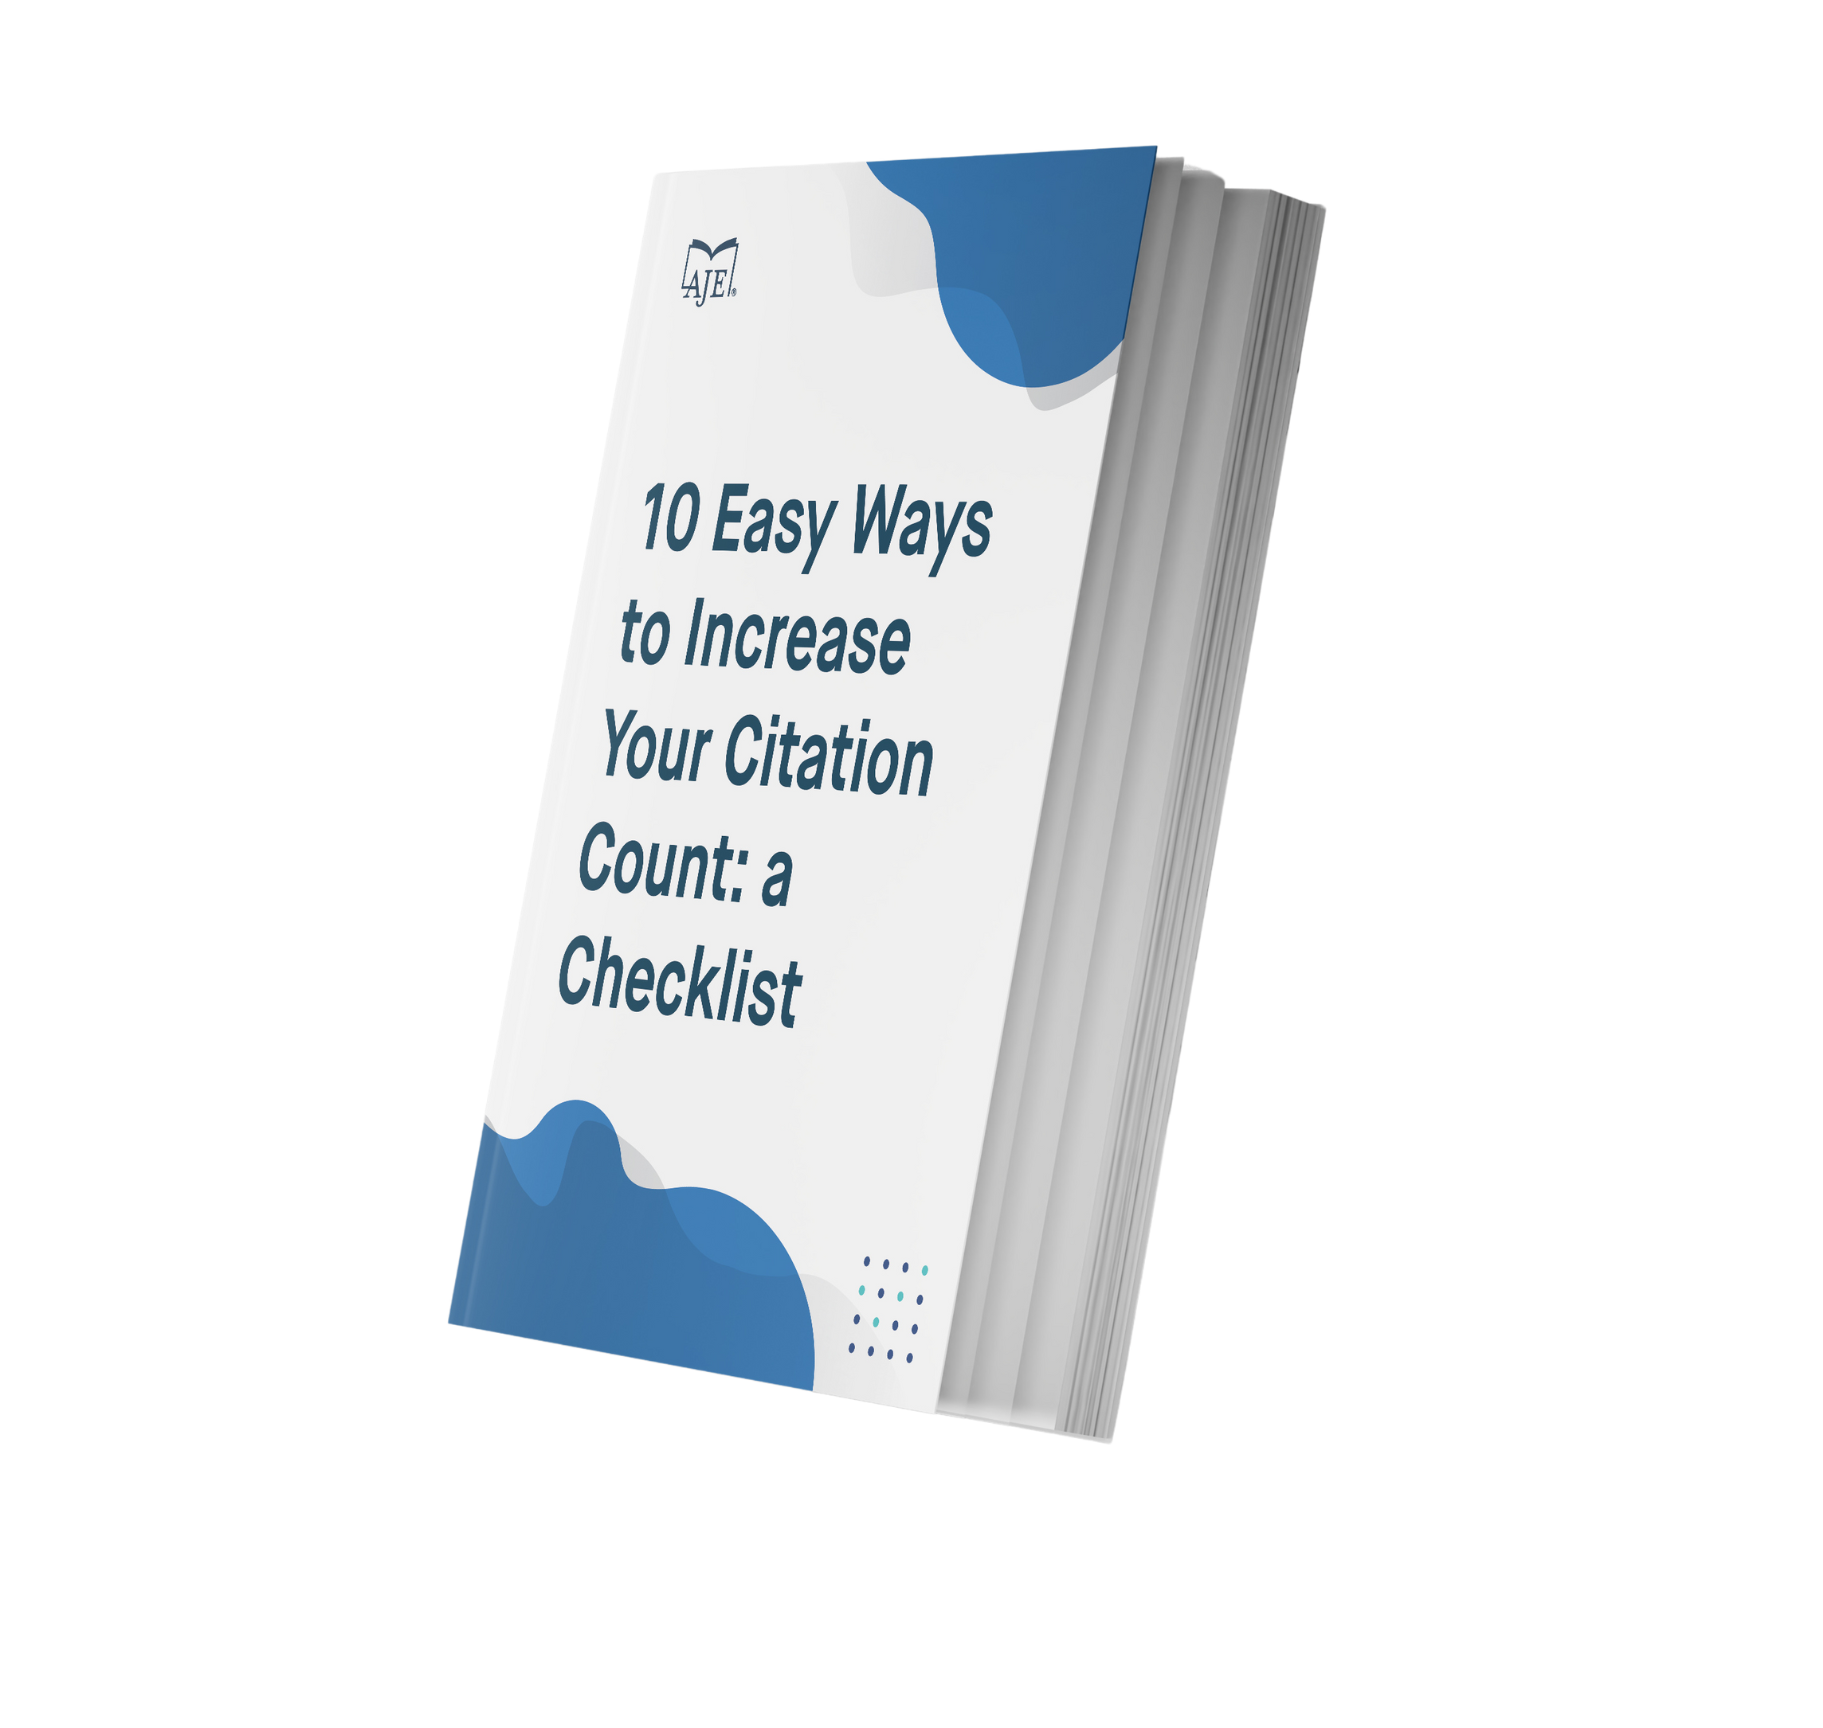 10 Easy Ways to Increase Your Citation Count - a Checklist e-book cover